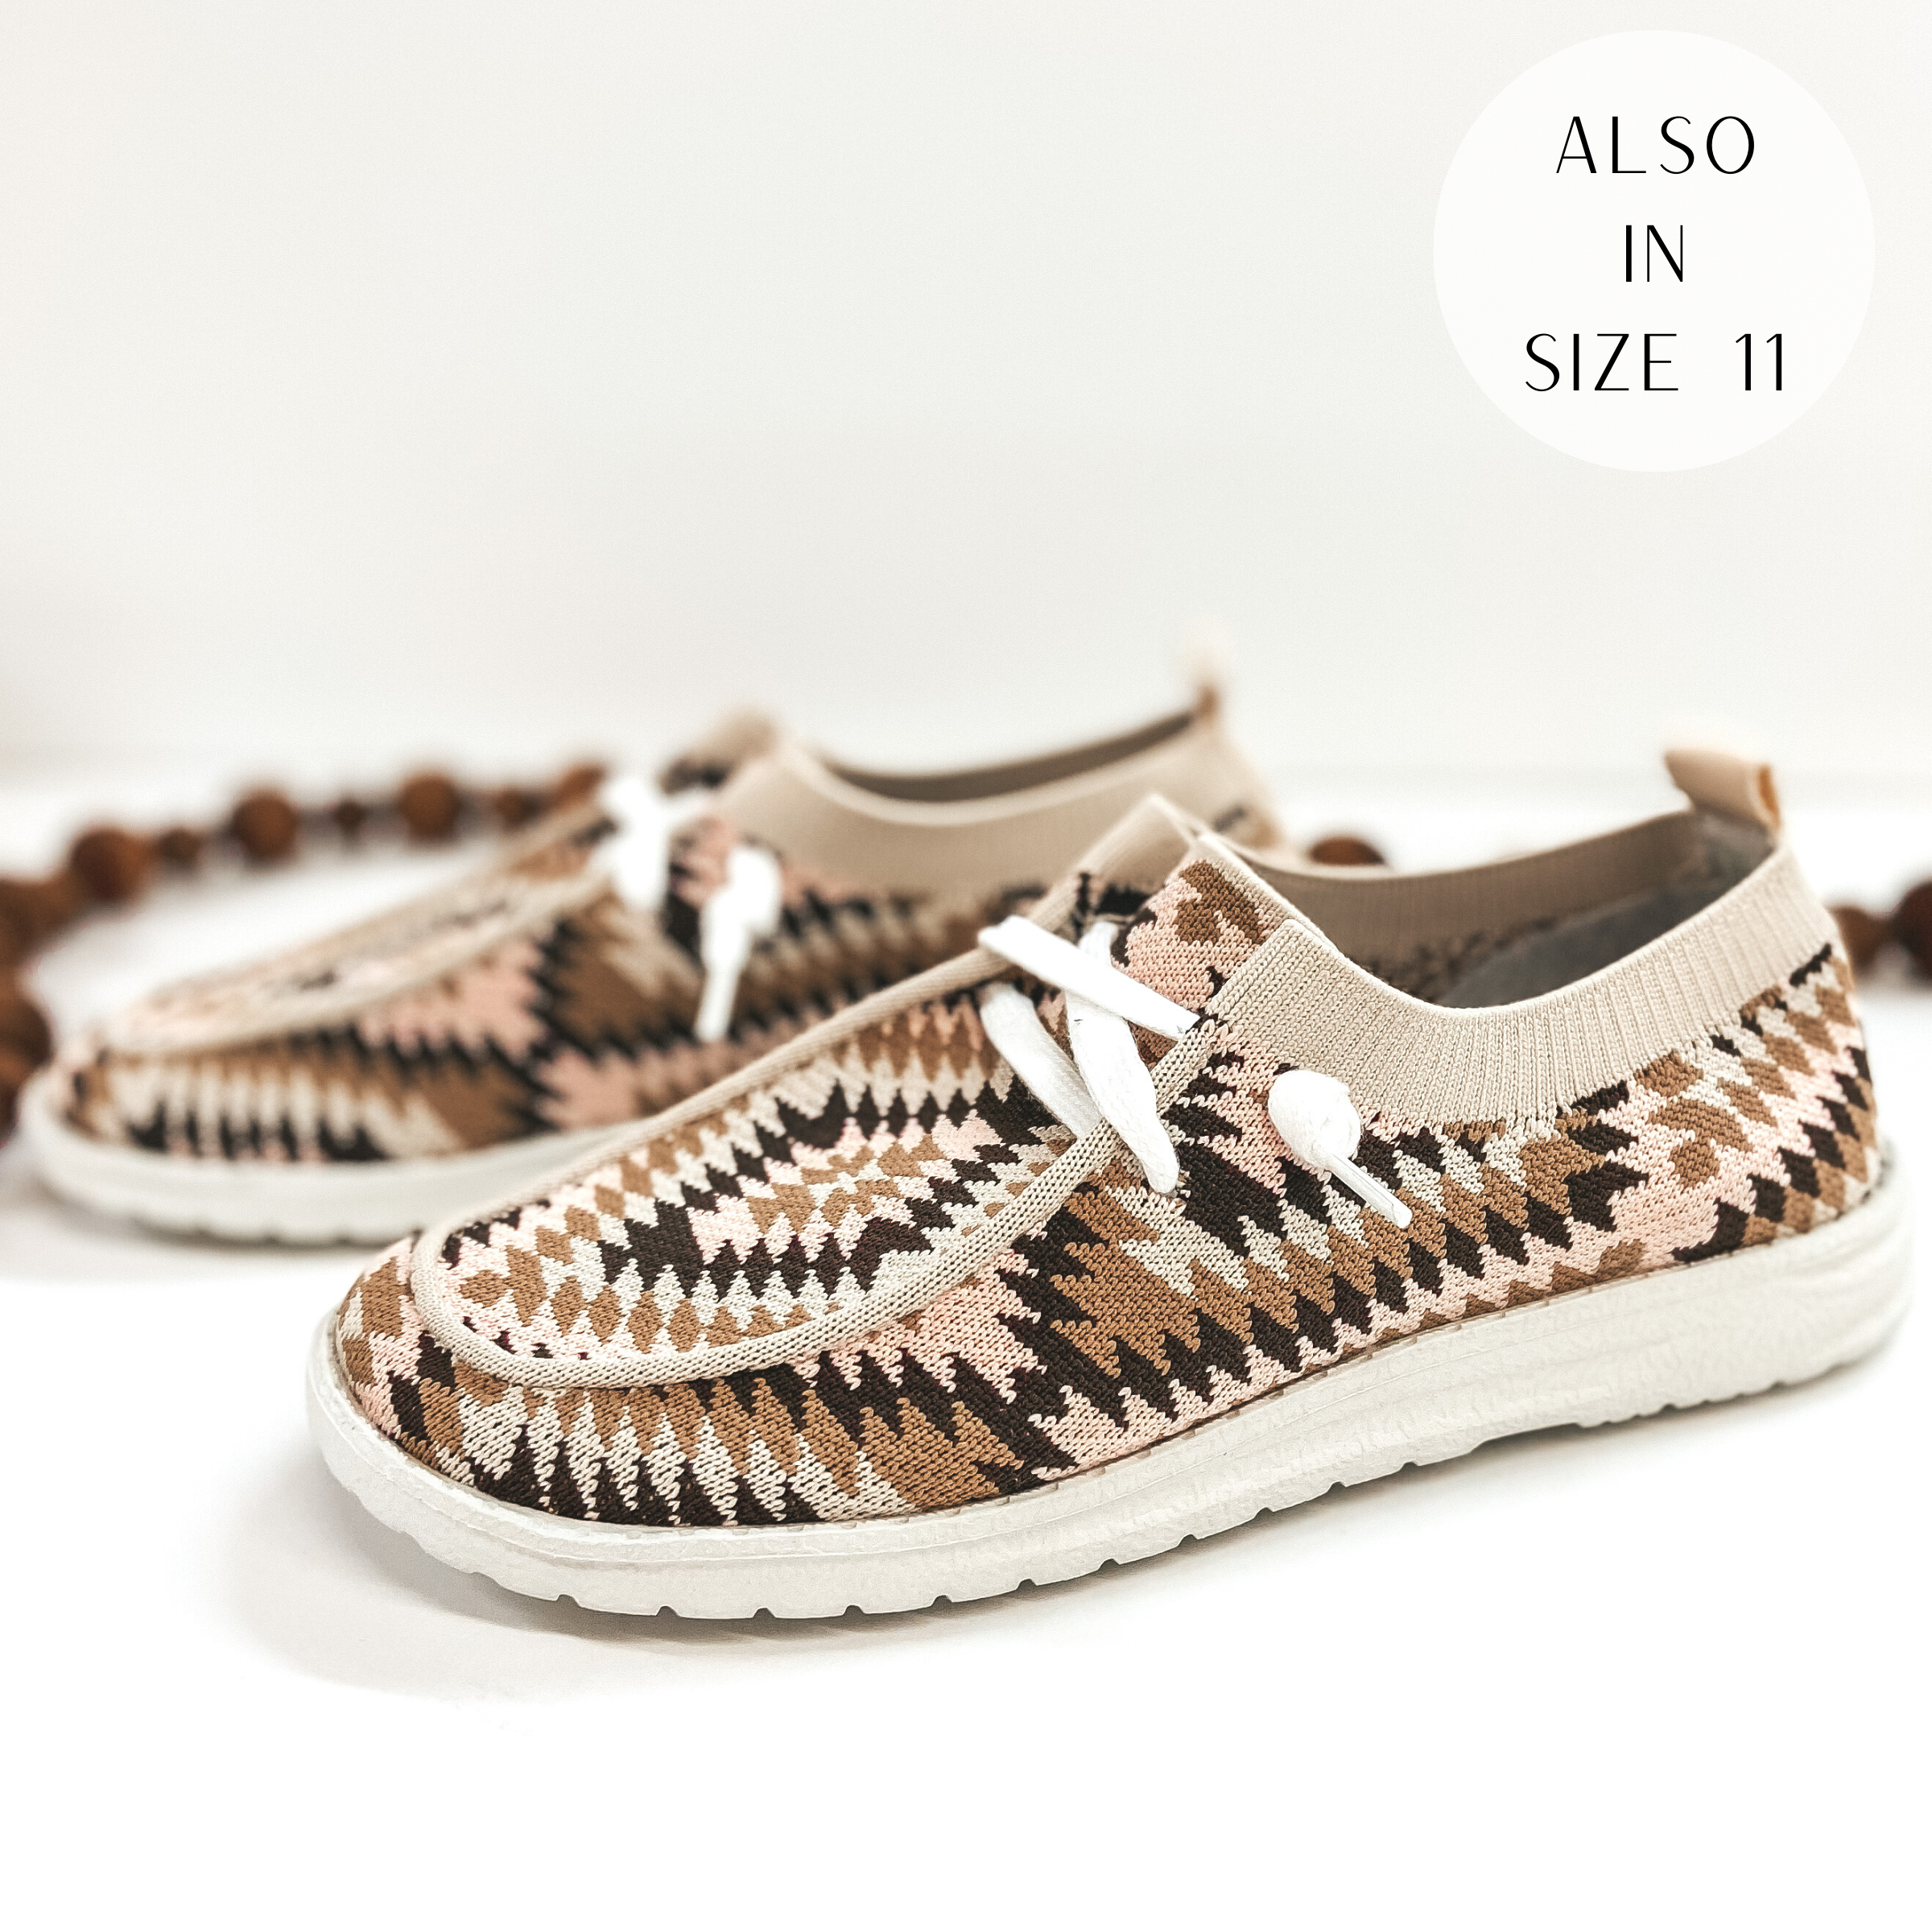 A pair of aztec print slip on loafers that are blush pink and brown. Pictured on white background with brown beads.